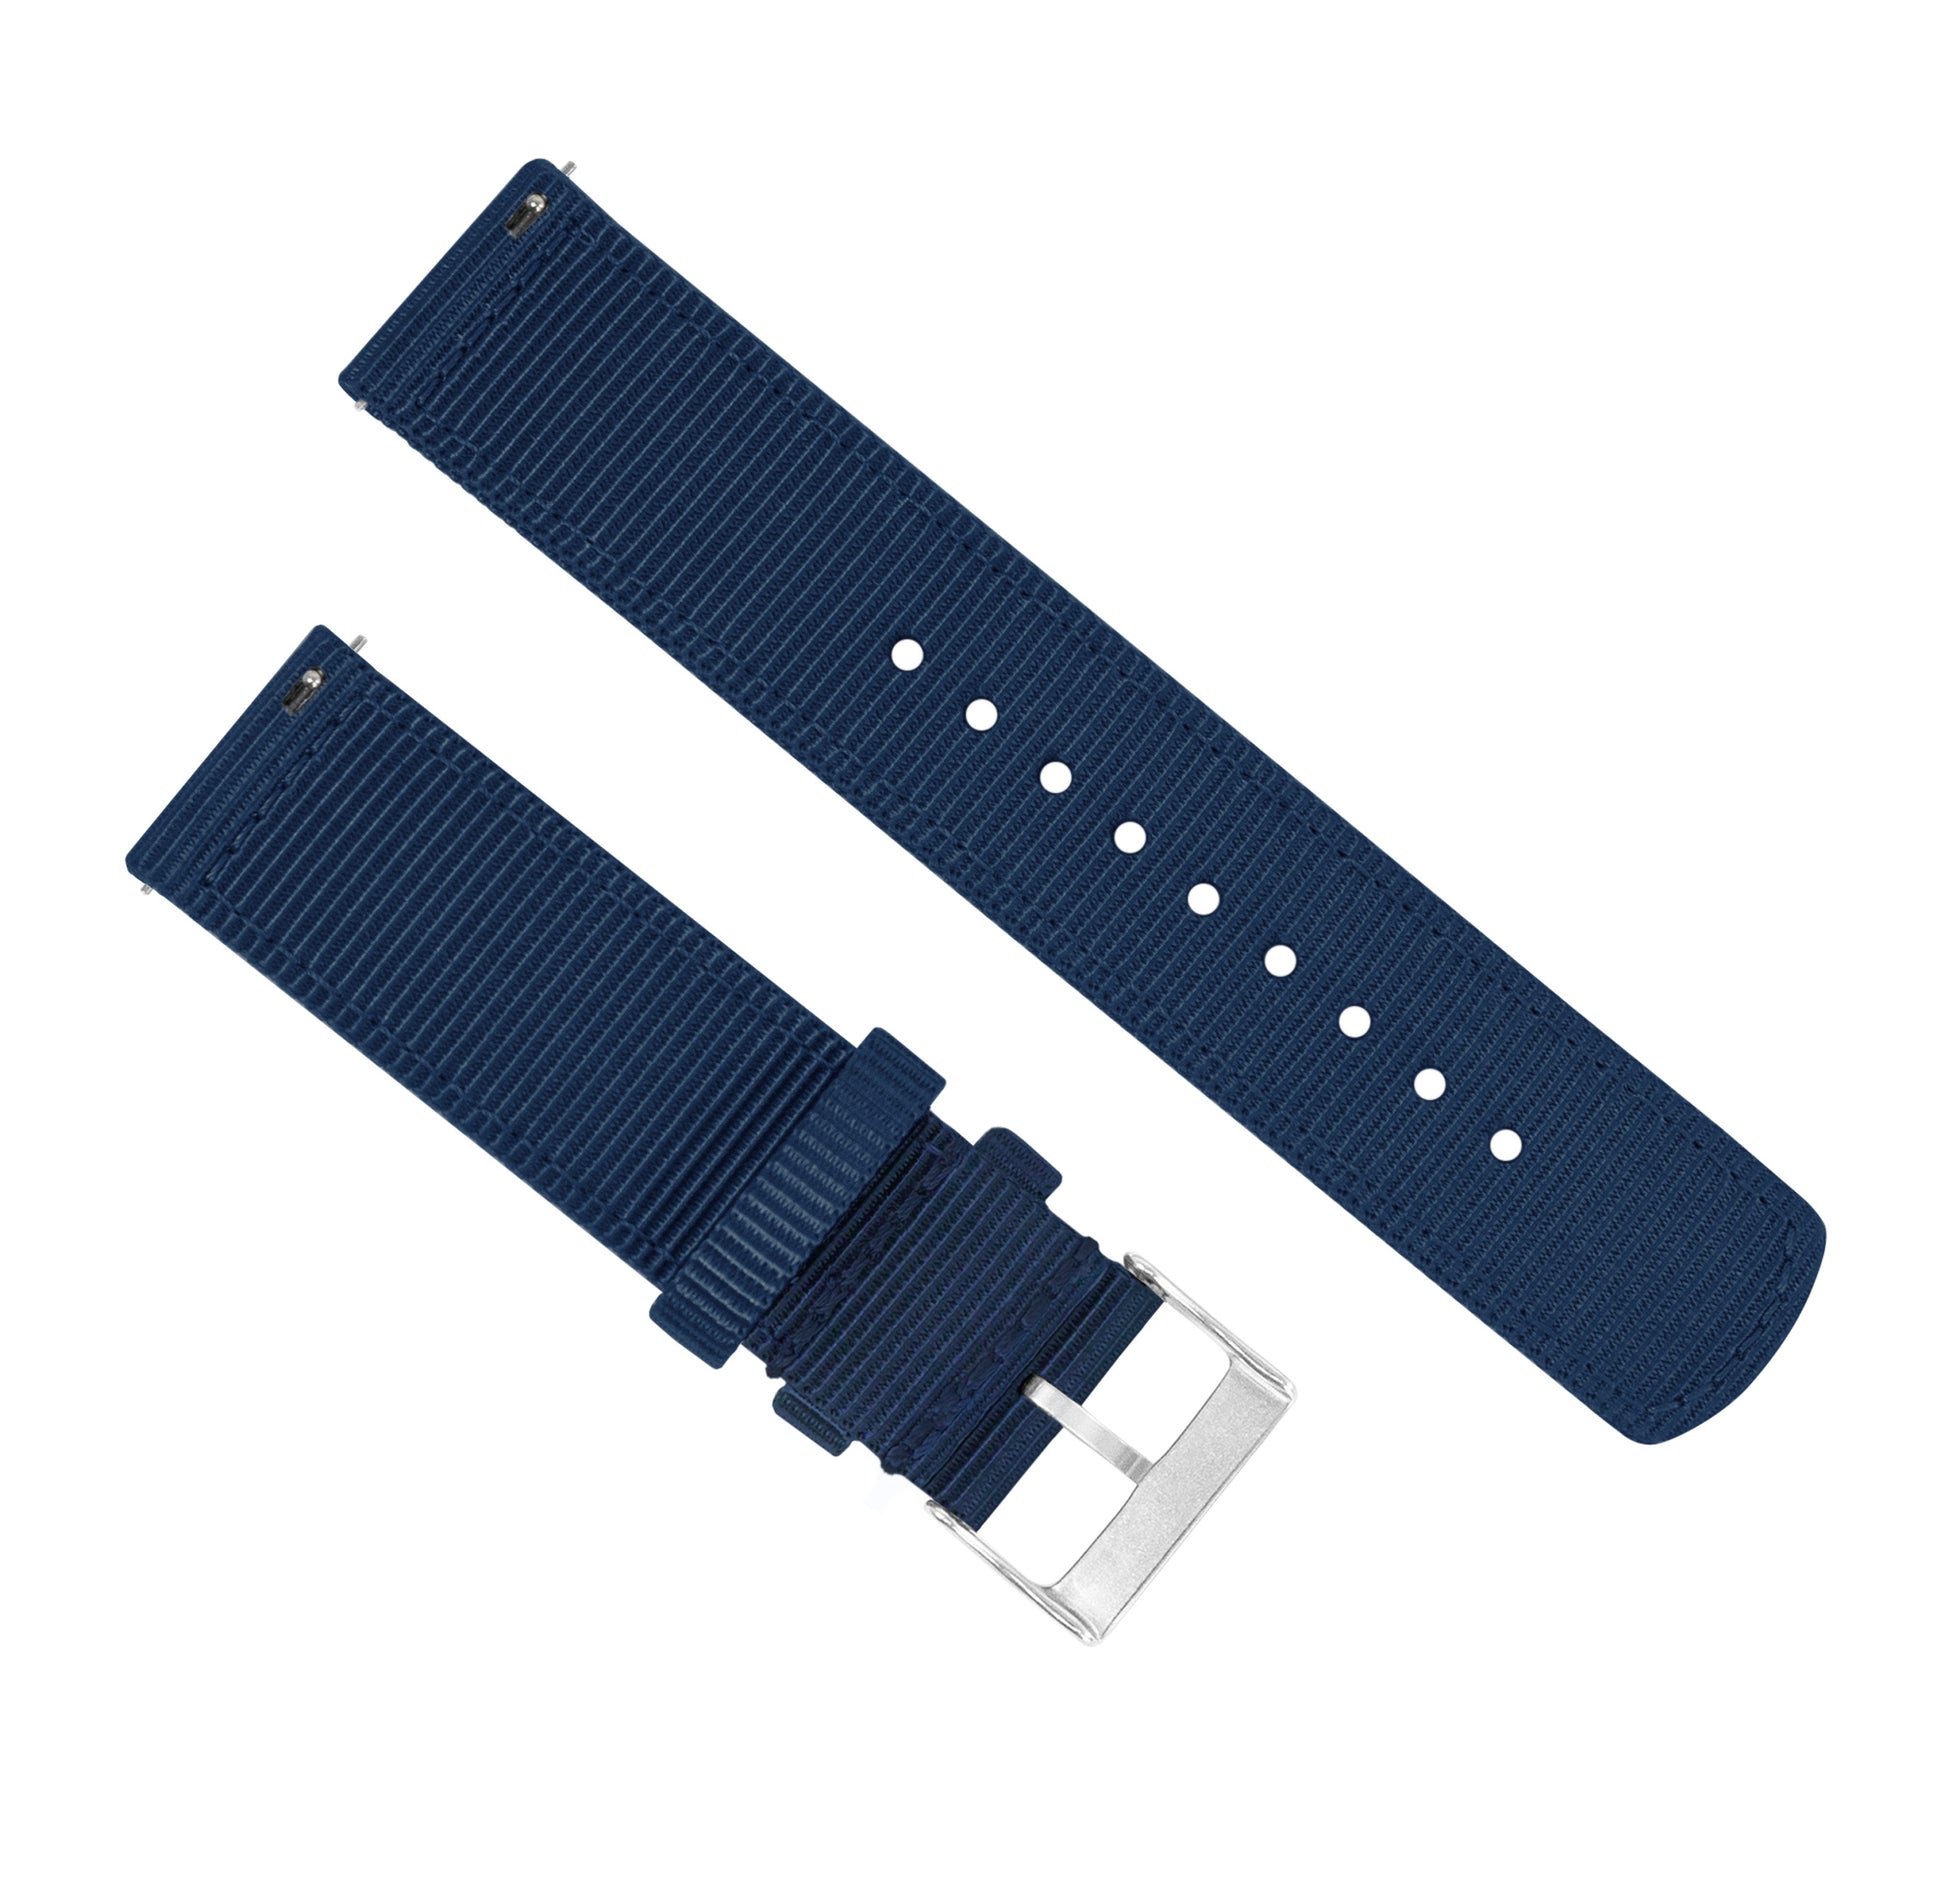 Fossil Gen 5 | Two-Piece NATO Style | Navy Blue - Barton Watch Bands